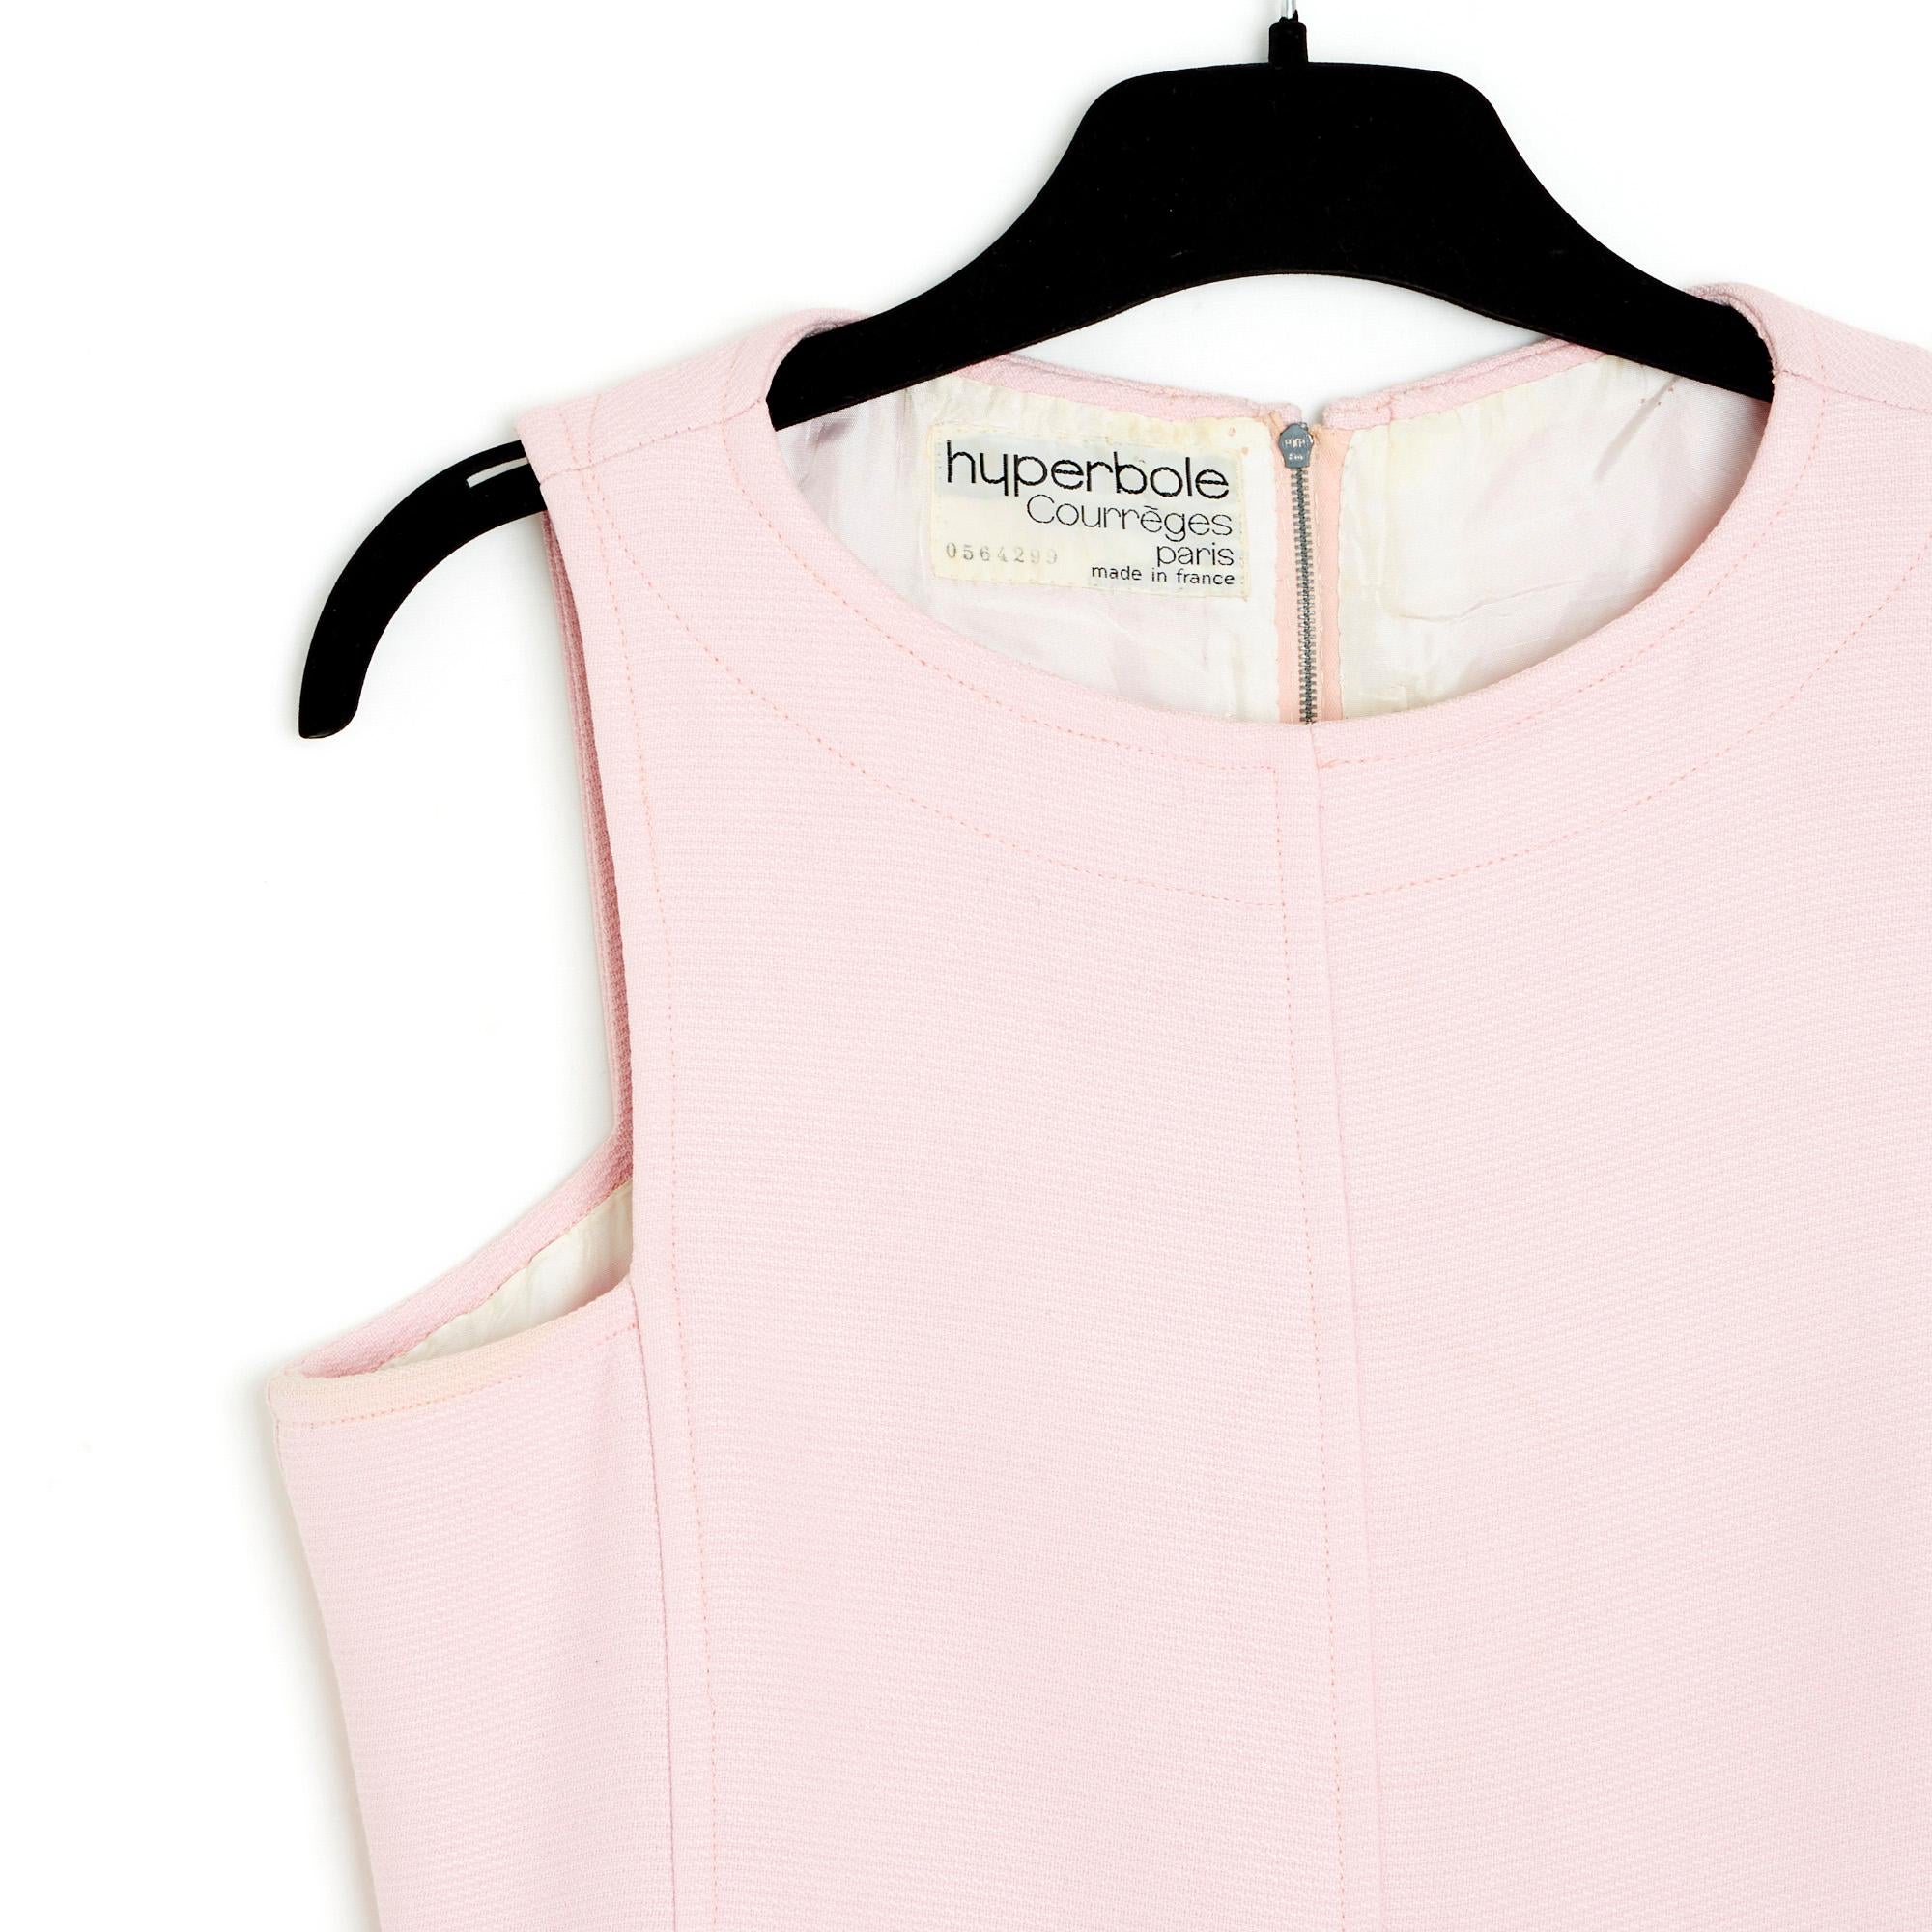 Courrèges Haute Couture dress in pale pink wool and cotton cloth (thick but supple), round neck, square armholes, flared skirt with full-length slit on the left side, ecru canvas lining, fastening with a long zip in the back. No composition or size